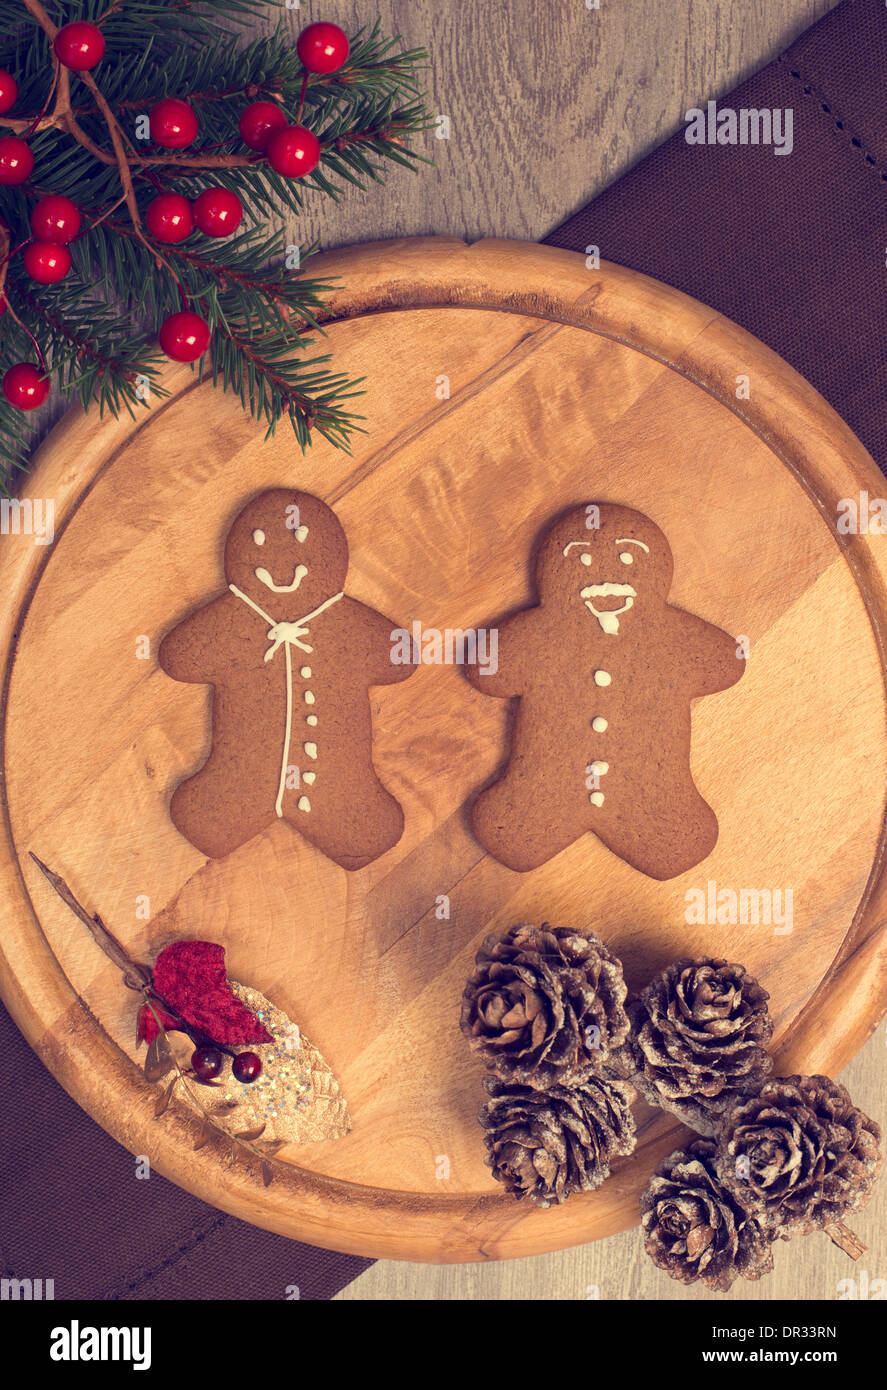 Homemade gingerbread cookies for Christmas Stock Photo